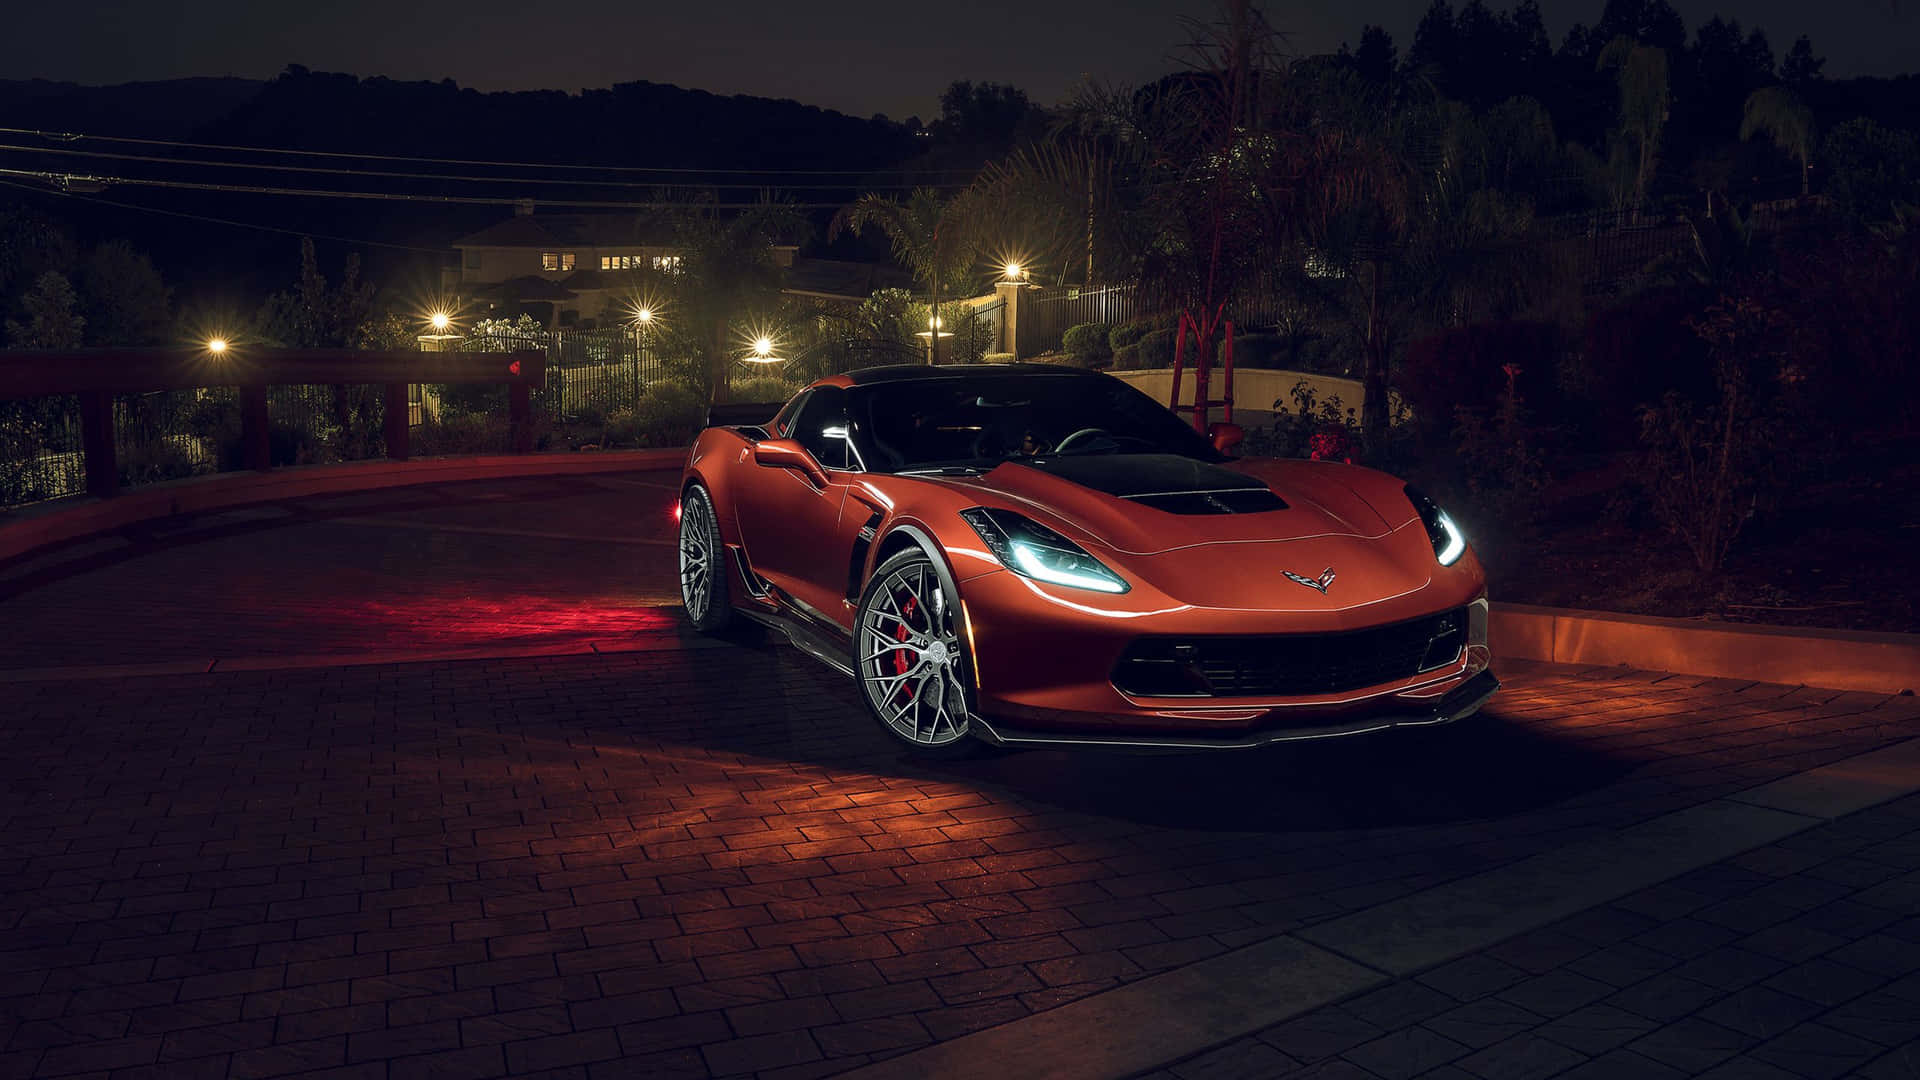 Get Ready For Thrilling Adrenaline-Inducing Adventures With a Corvette